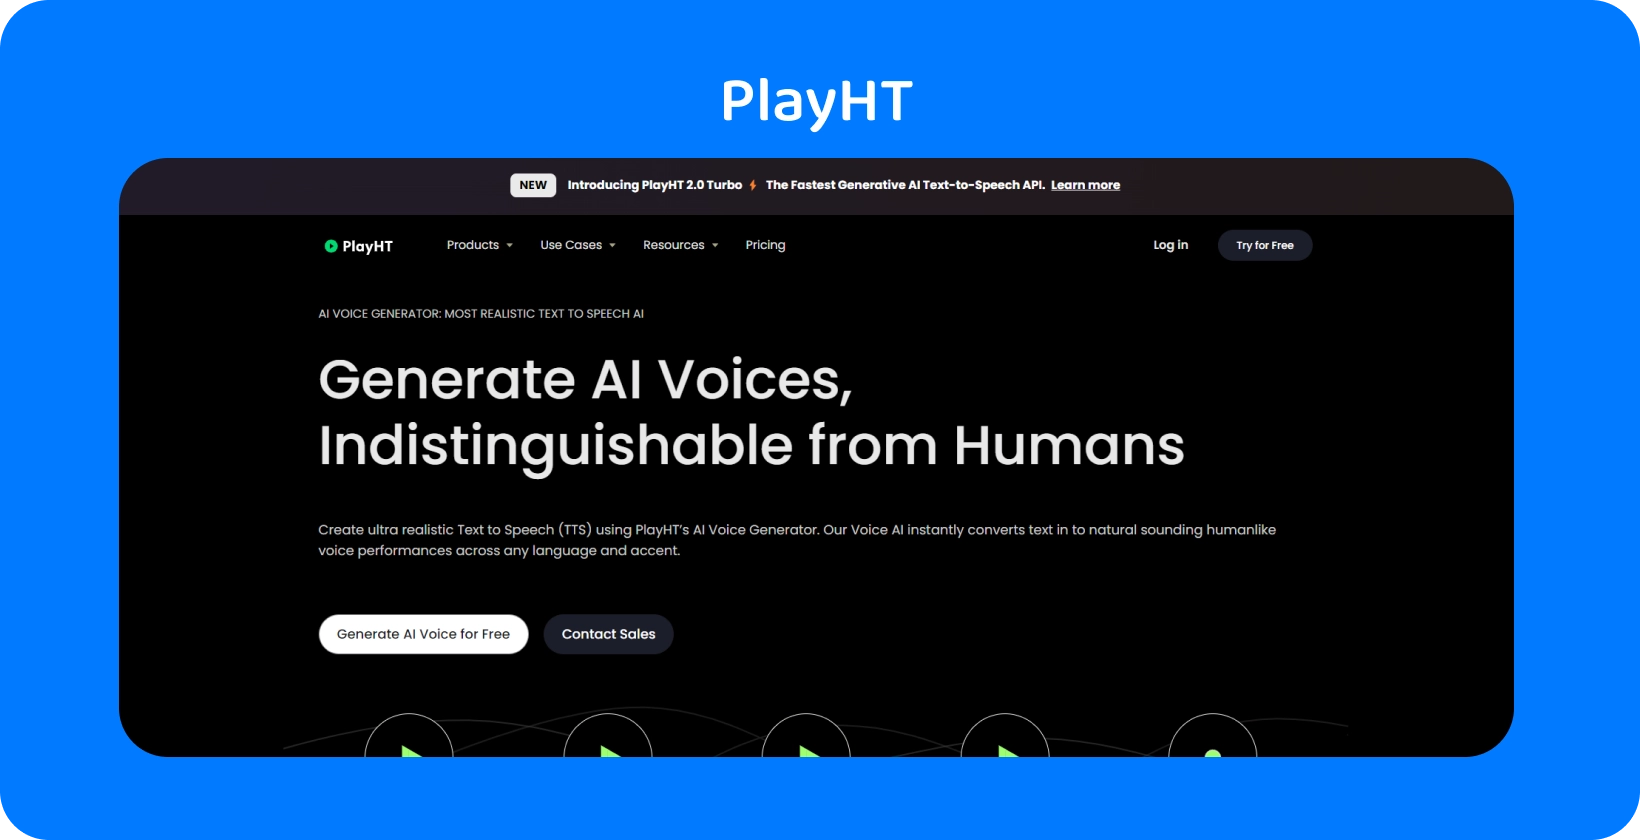 PlayHT offers AI-generated voices nearly indistinguishable from human speech for text-to-speech needs.